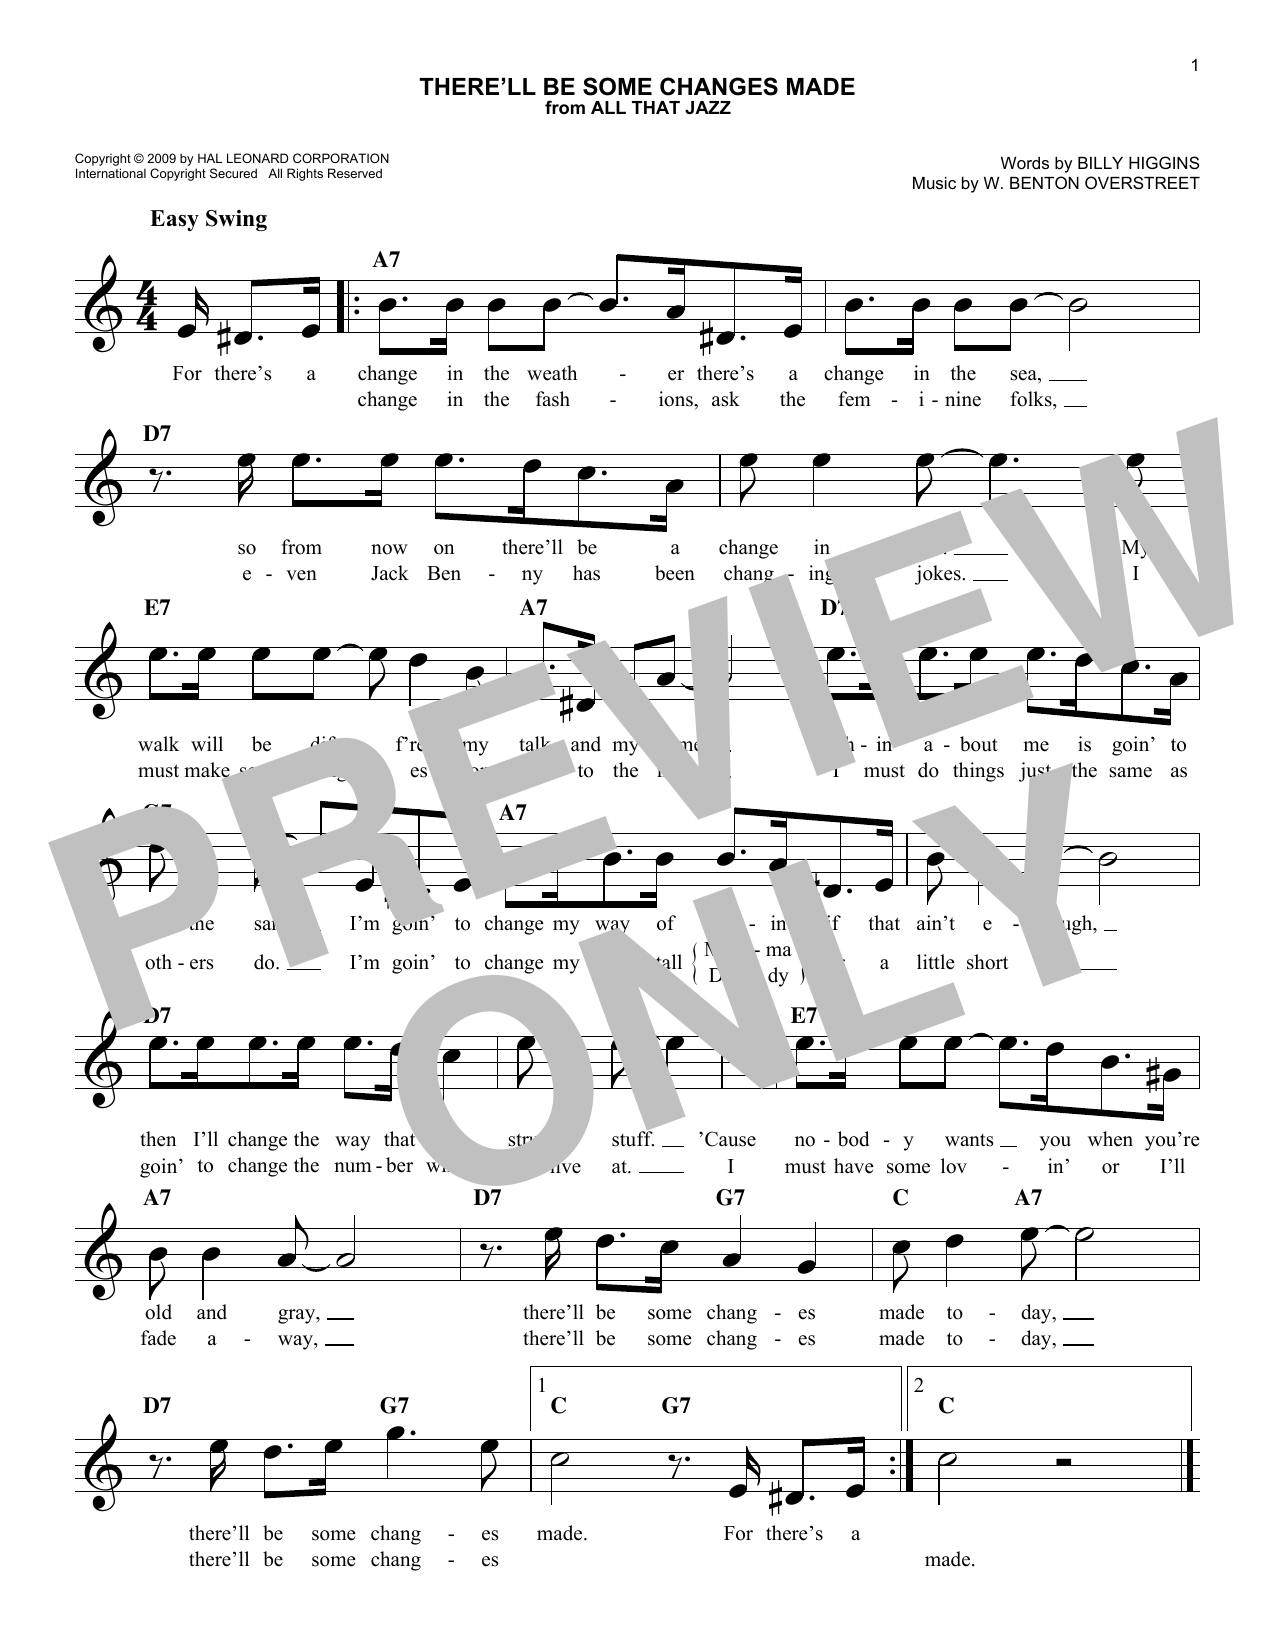 Download W. Benton Overstreet There'll Be Some Changes Made Sheet Music